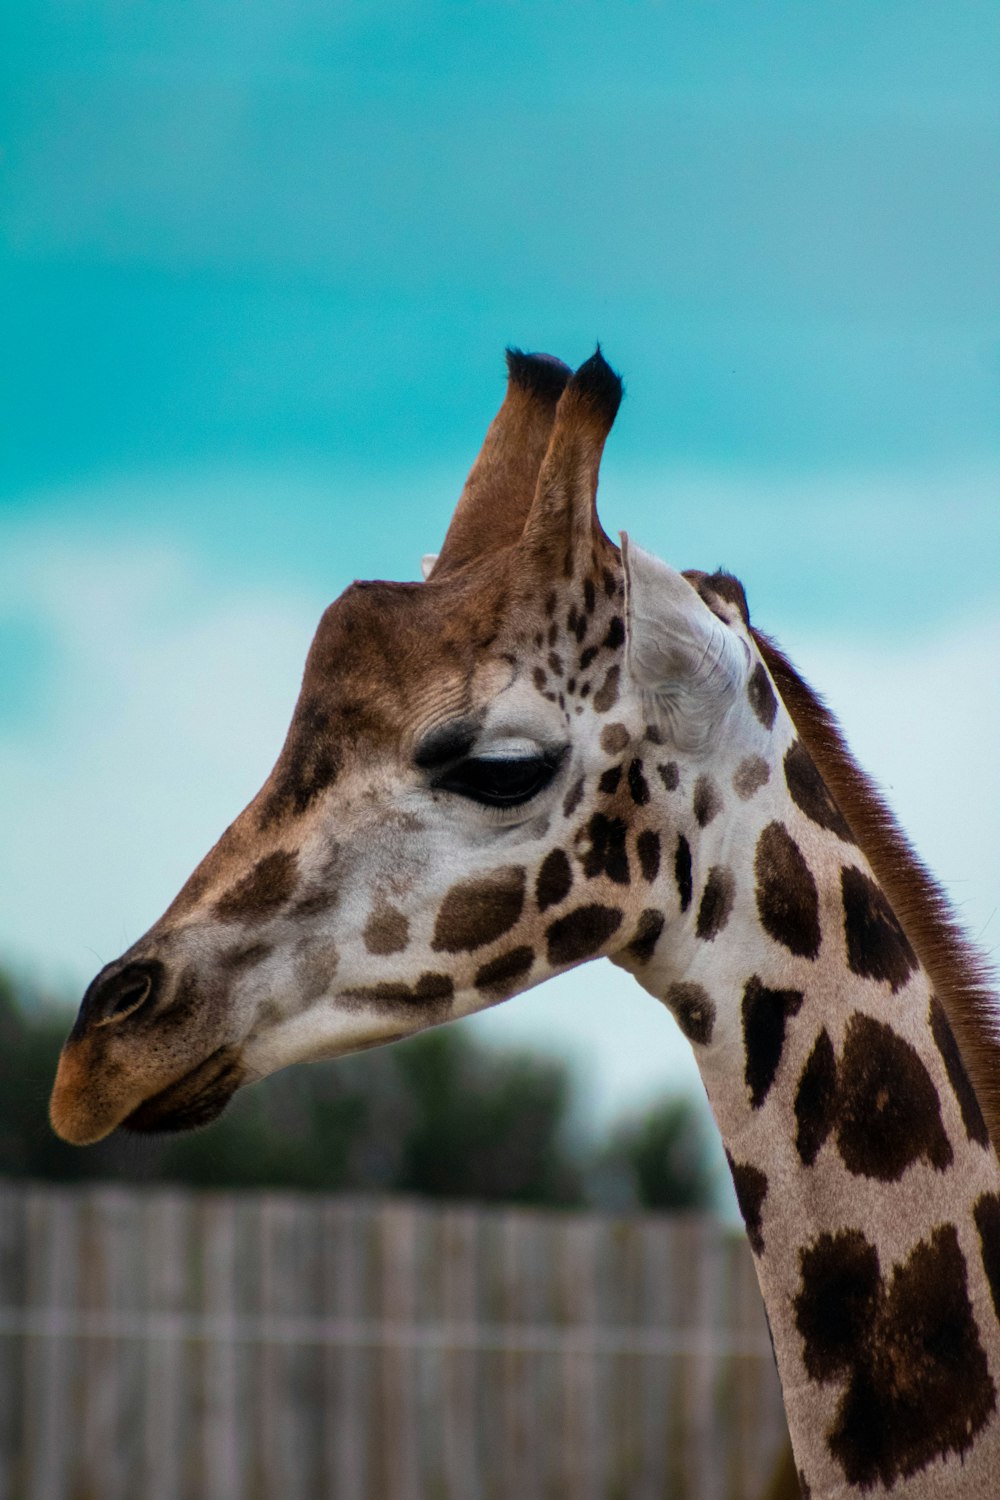 a giraffe stands in front of a wooden fence